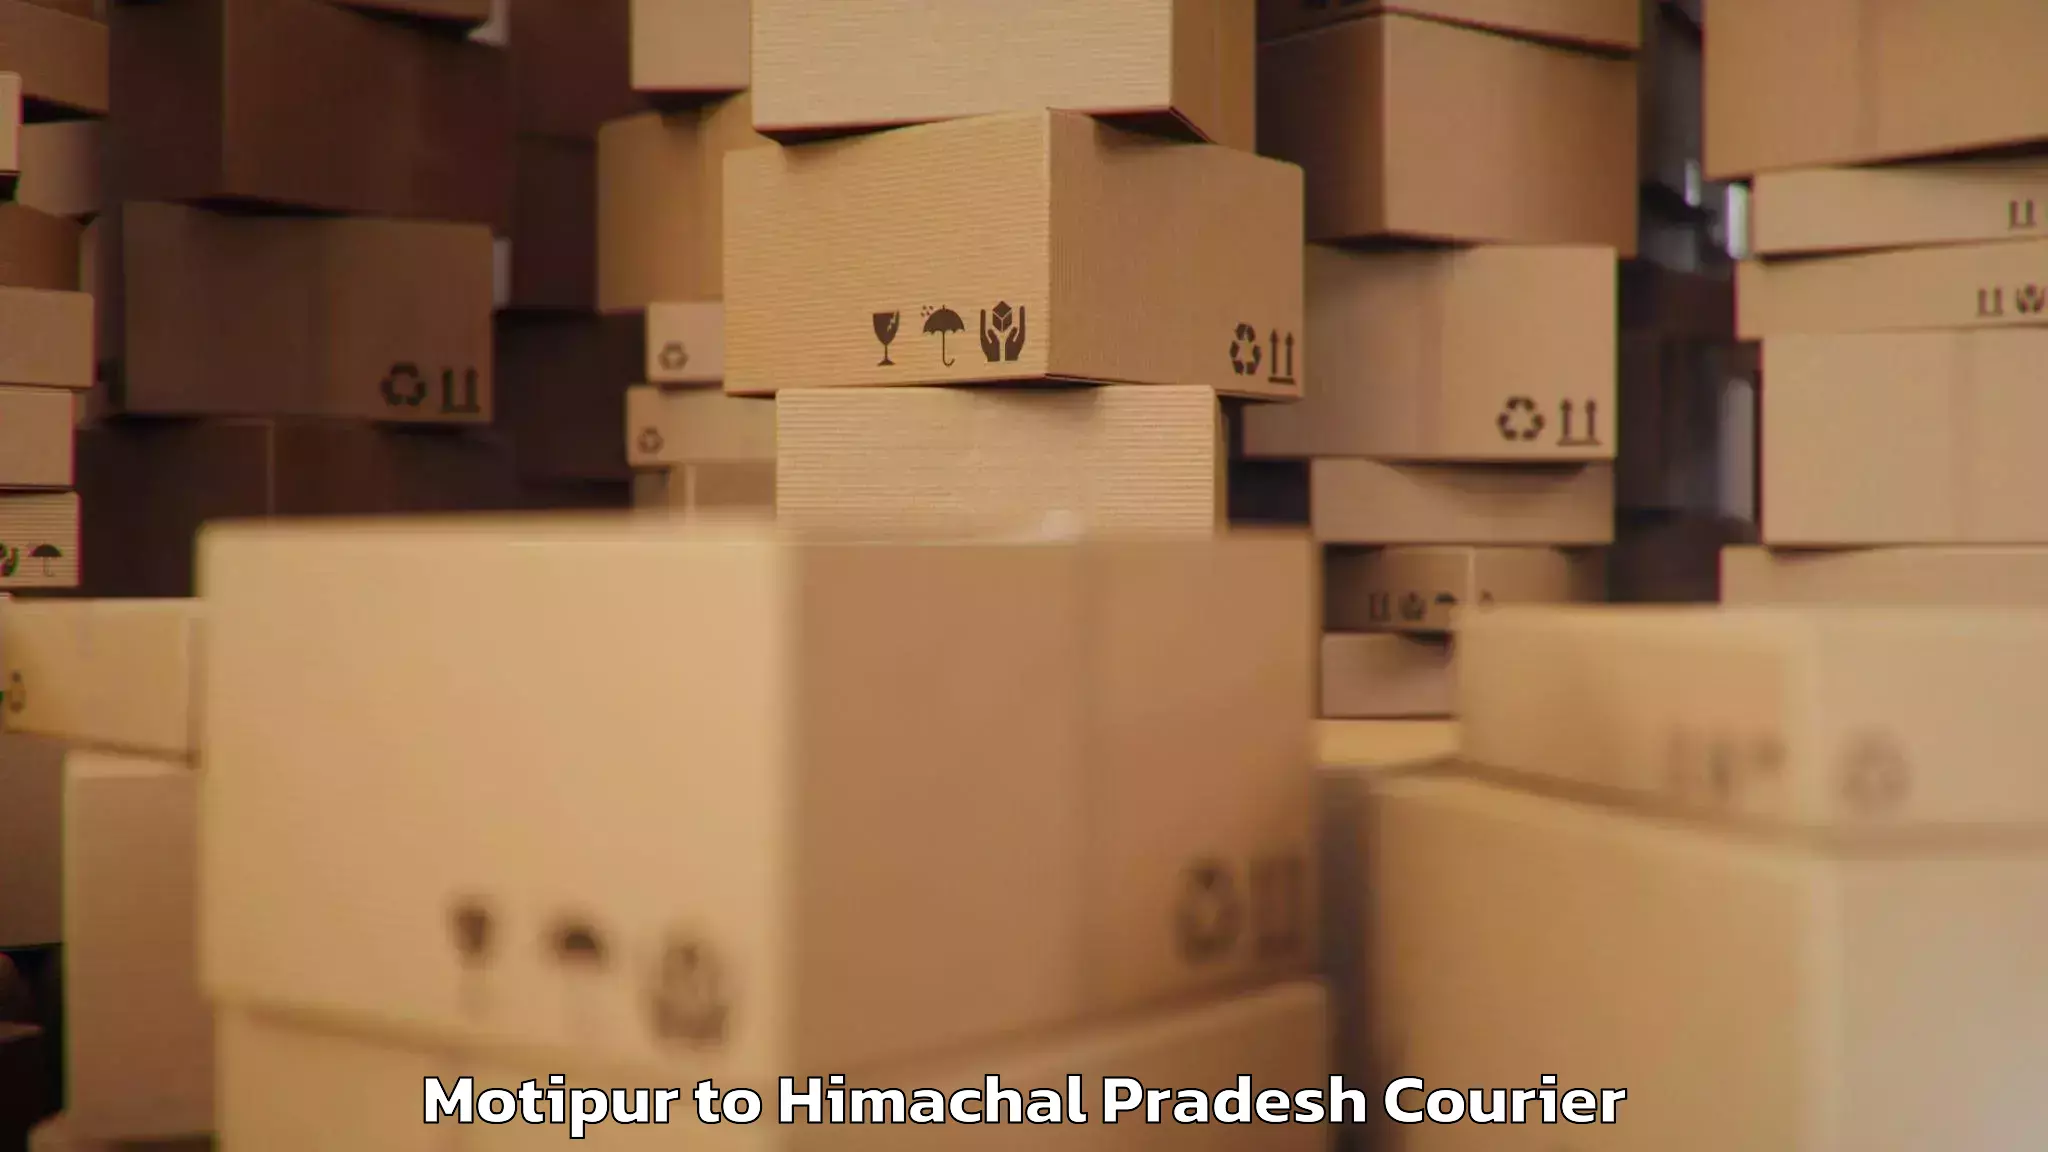 Luggage transport consulting Motipur to Dheera